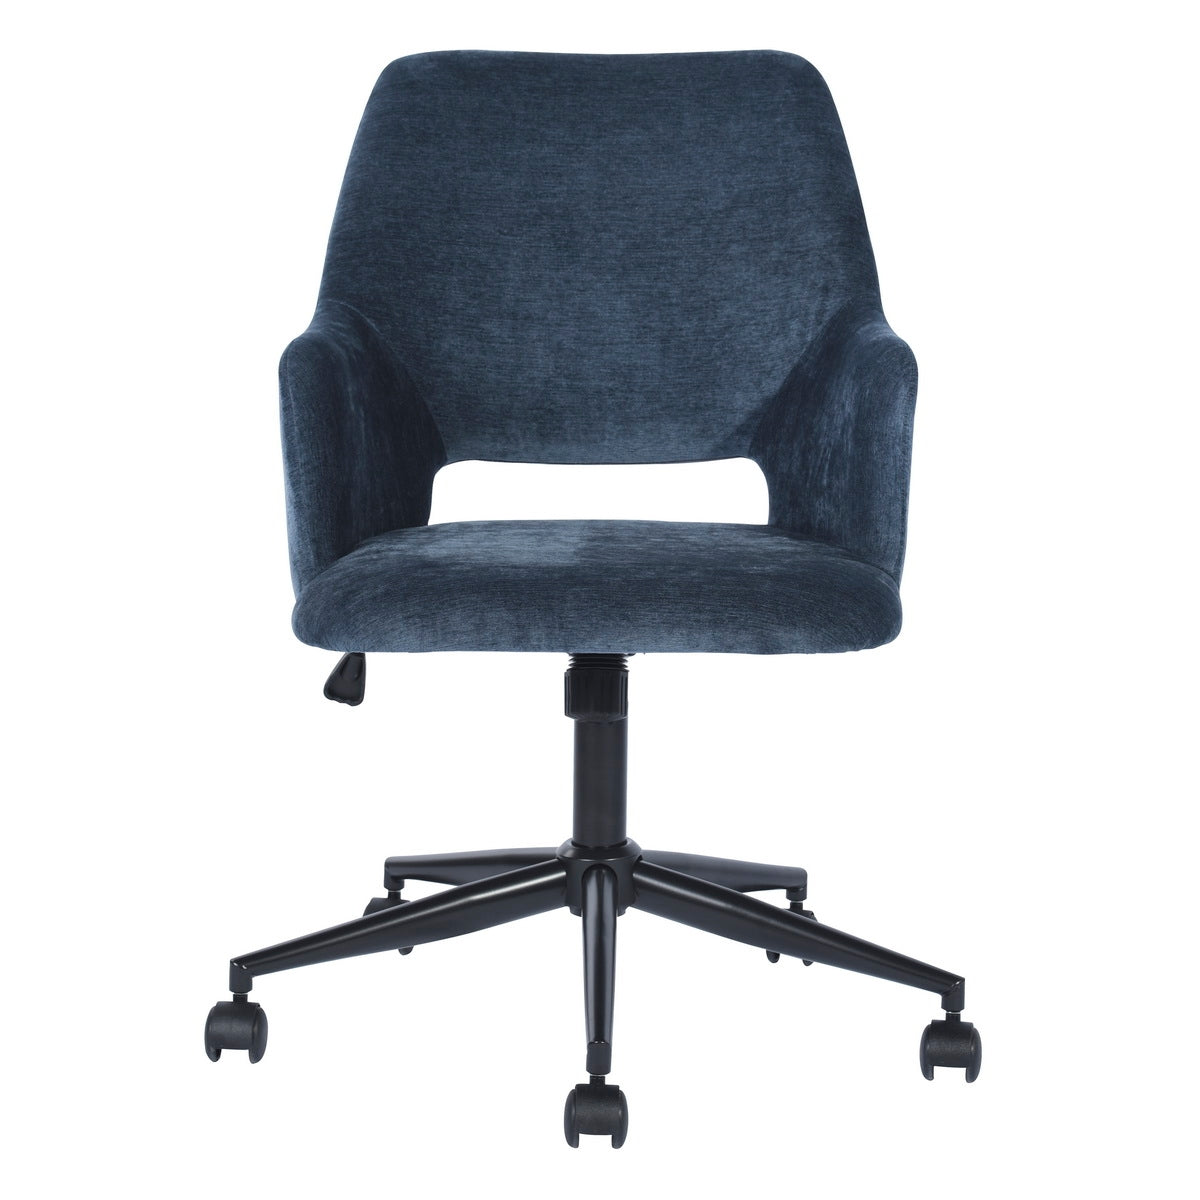 Office chair-Dark Blue Fabric Upholstery with Metal Frame Chair